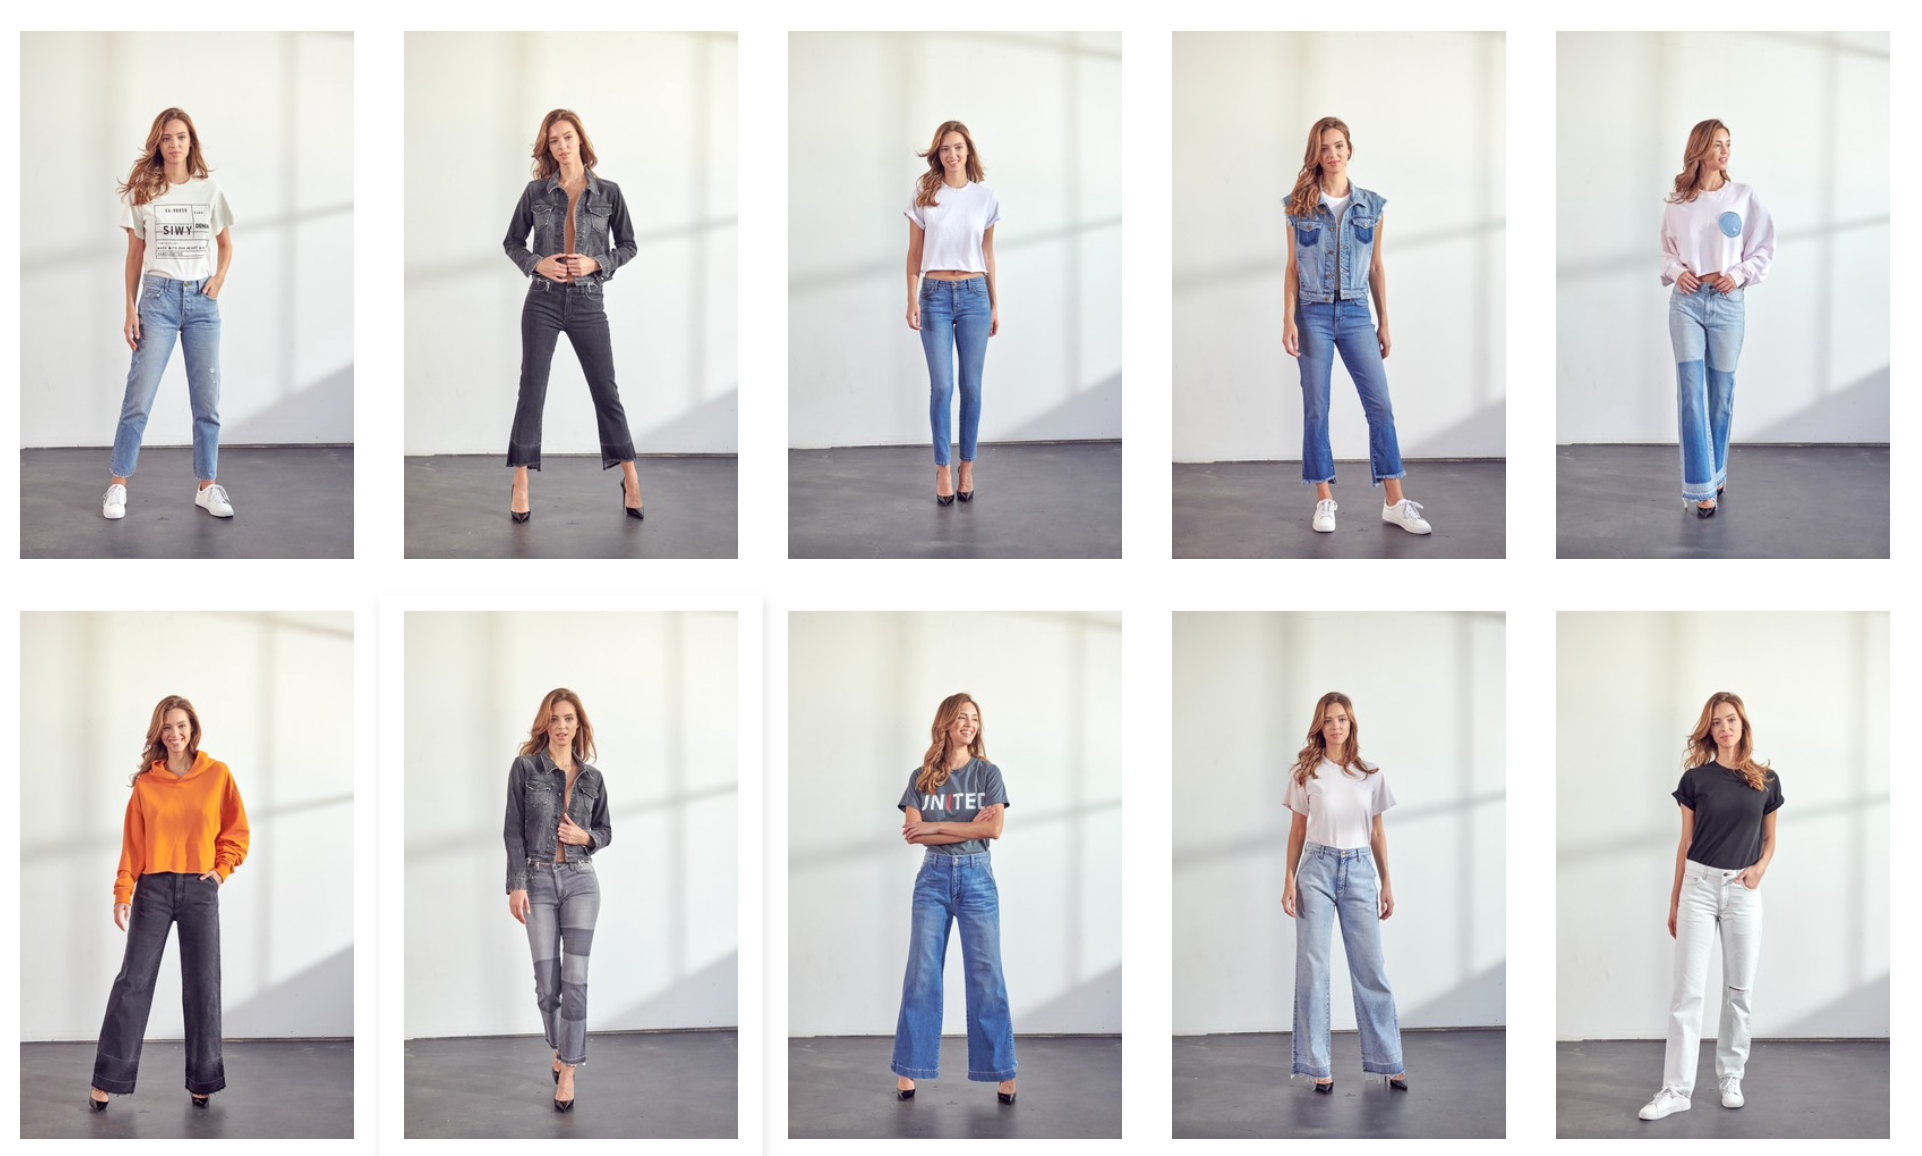 Clothes sizes: What size 12 jeans look like in 7 different shops